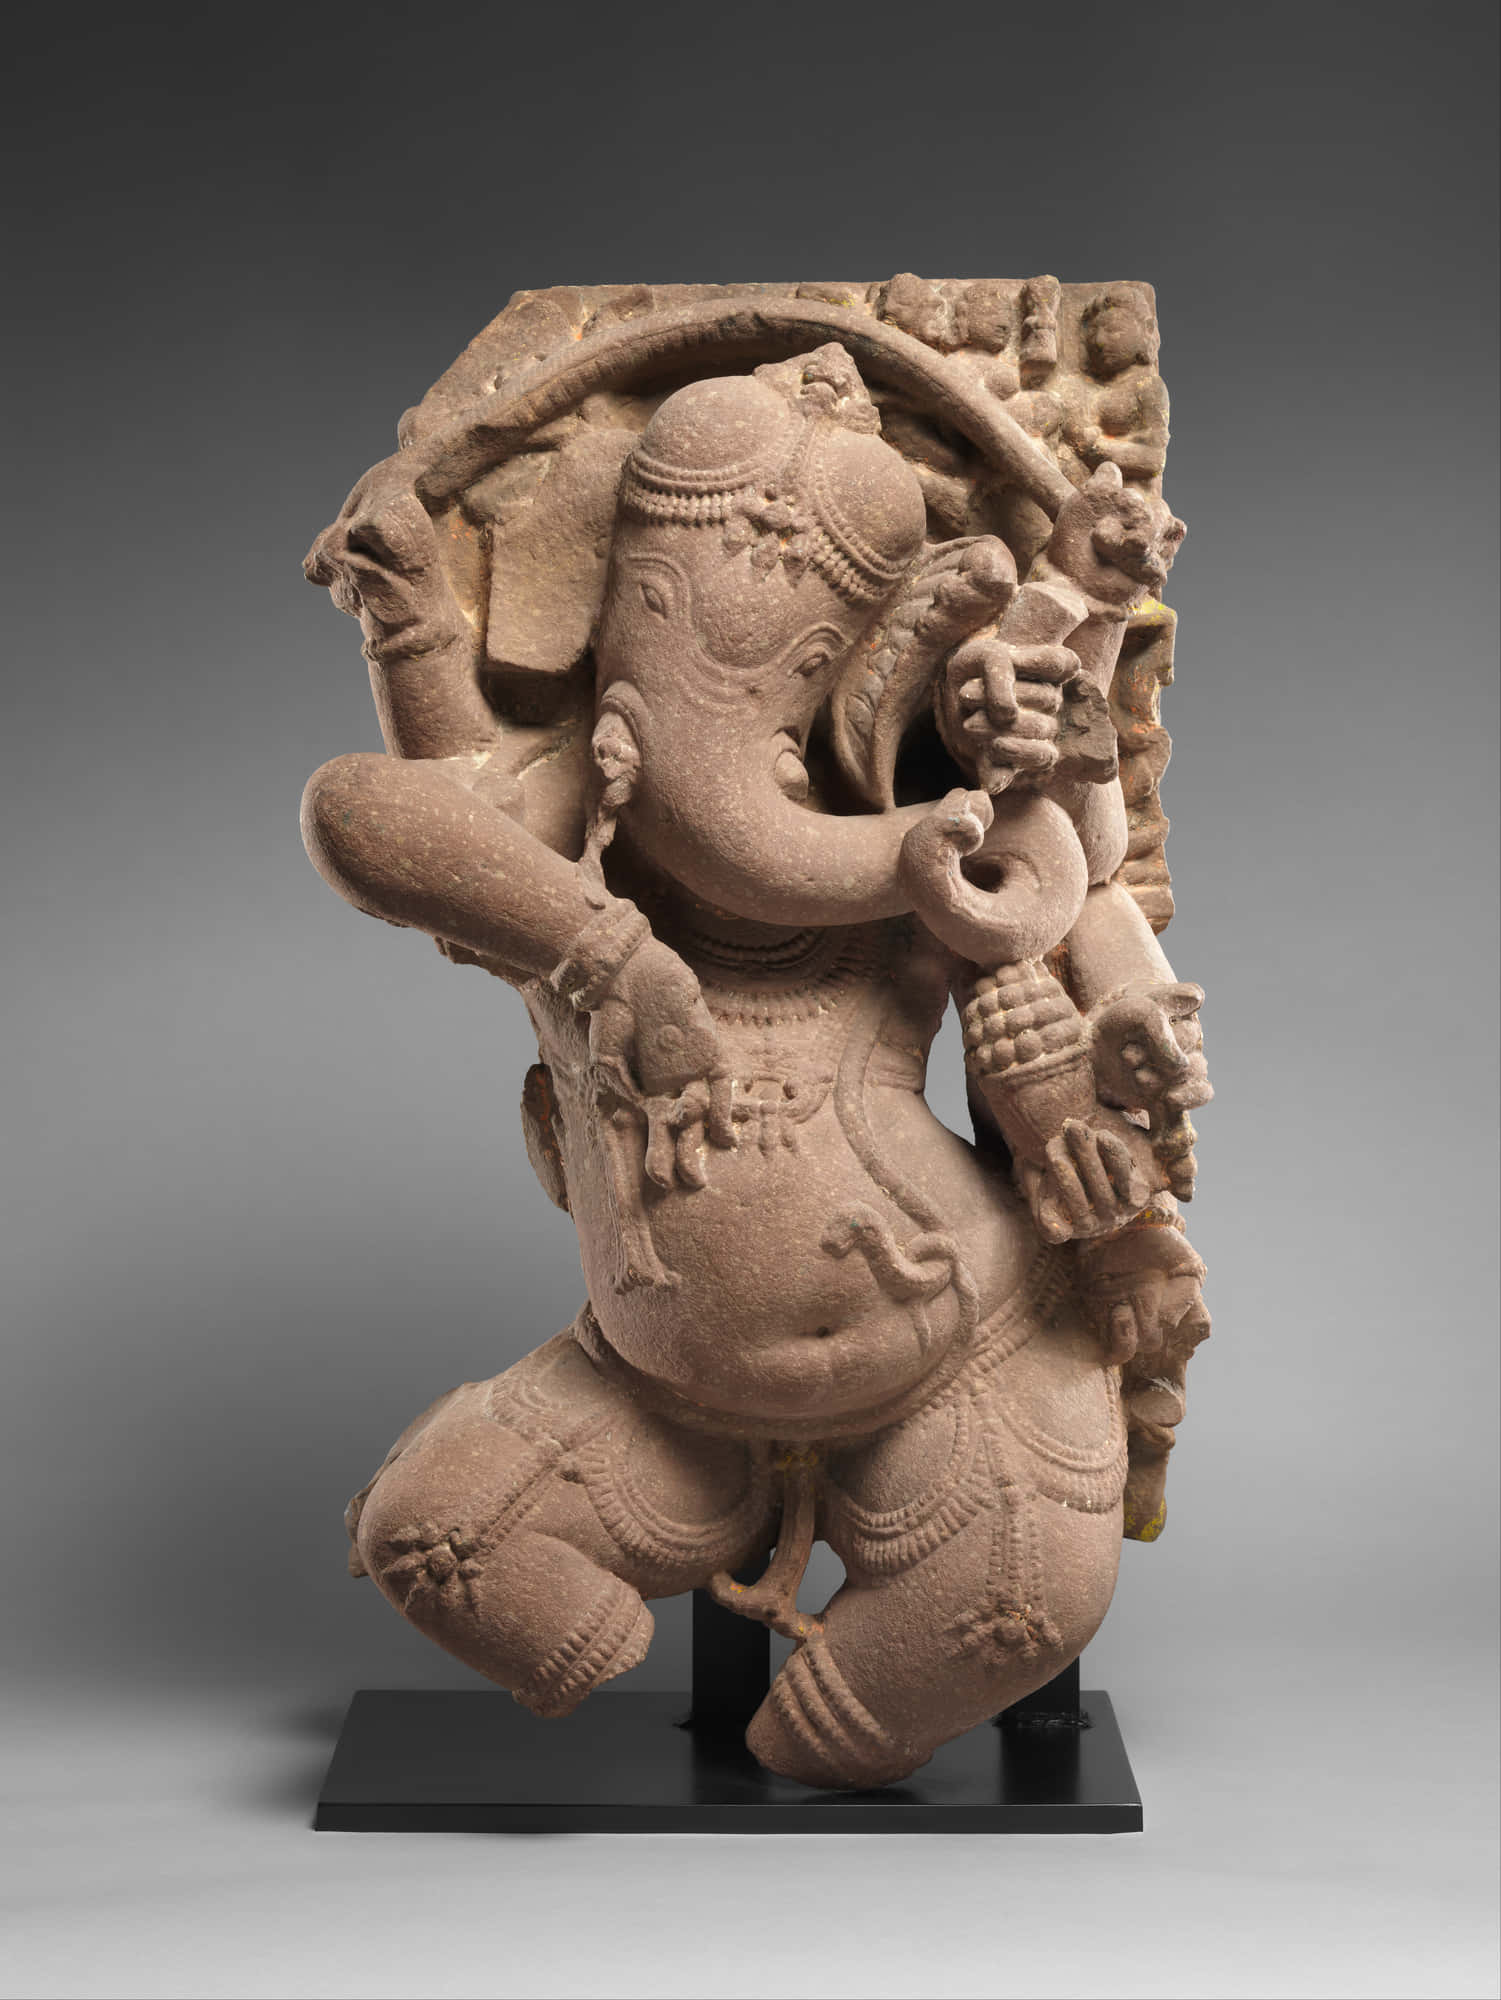 Lord Ganesha Blesses All of Creation